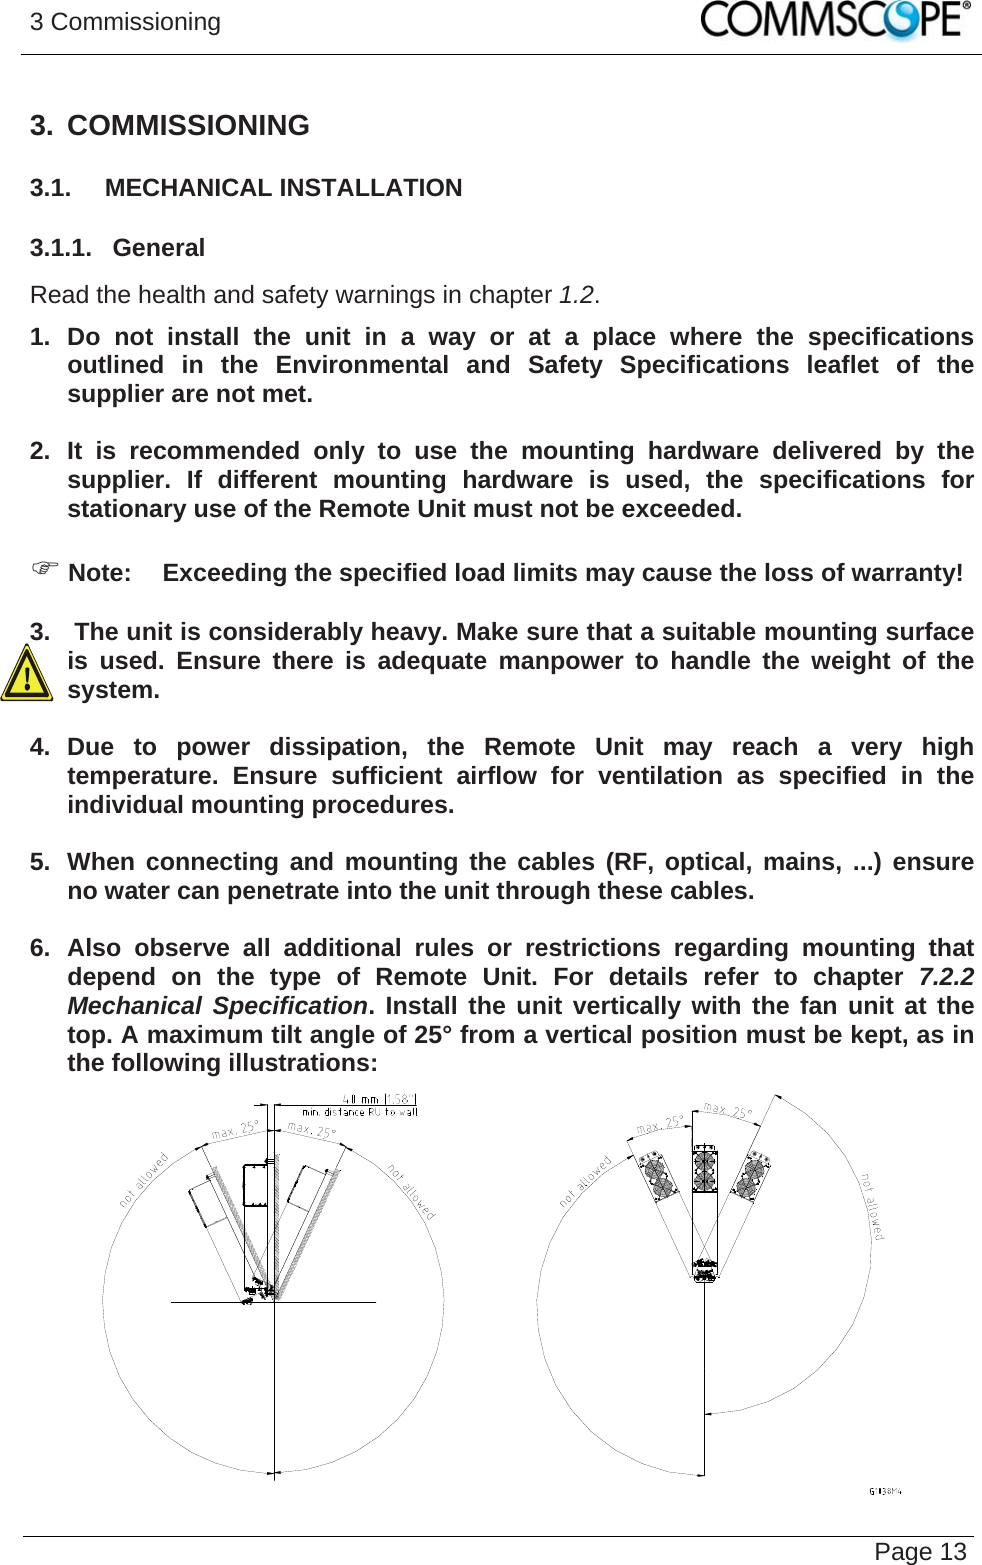 3 Commissioning   Page 133. COMMISSIONING 3.1.  MECHANICAL INSTALLATION 3.1.1.  General Read the health and safety warnings in chapter 1.2. 1. Do not install the unit in a way or at a place where the specifications outlined in the Environmental and Safety Specifications leaflet of the supplier are not met.  2. It is recommended only to use the mounting hardware delivered by the supplier. If different mounting hardware is used, the specifications for stationary use of the Remote Unit must not be exceeded.  ) Note:  Exceeding the specified load limits may cause the loss of warranty!  3.   The unit is considerably heavy. Make sure that a suitable mounting surface is used. Ensure there is adequate manpower to handle the weight of the system.  4. Due to power dissipation, the Remote Unit may reach a very high temperature. Ensure sufficient airflow for ventilation as specified in the individual mounting procedures.  5.  When connecting and mounting the cables (RF, optical, mains, ...) ensure no water can penetrate into the unit through these cables.  6. Also observe all additional rules or restrictions regarding mounting that depend on the type of Remote Unit. For details refer to chapter 7.2.2 Mechanical Specification. Install the unit vertically with the fan unit at the top. A maximum tilt angle of 25° from a vertical position must be kept, as in the following illustrations:   